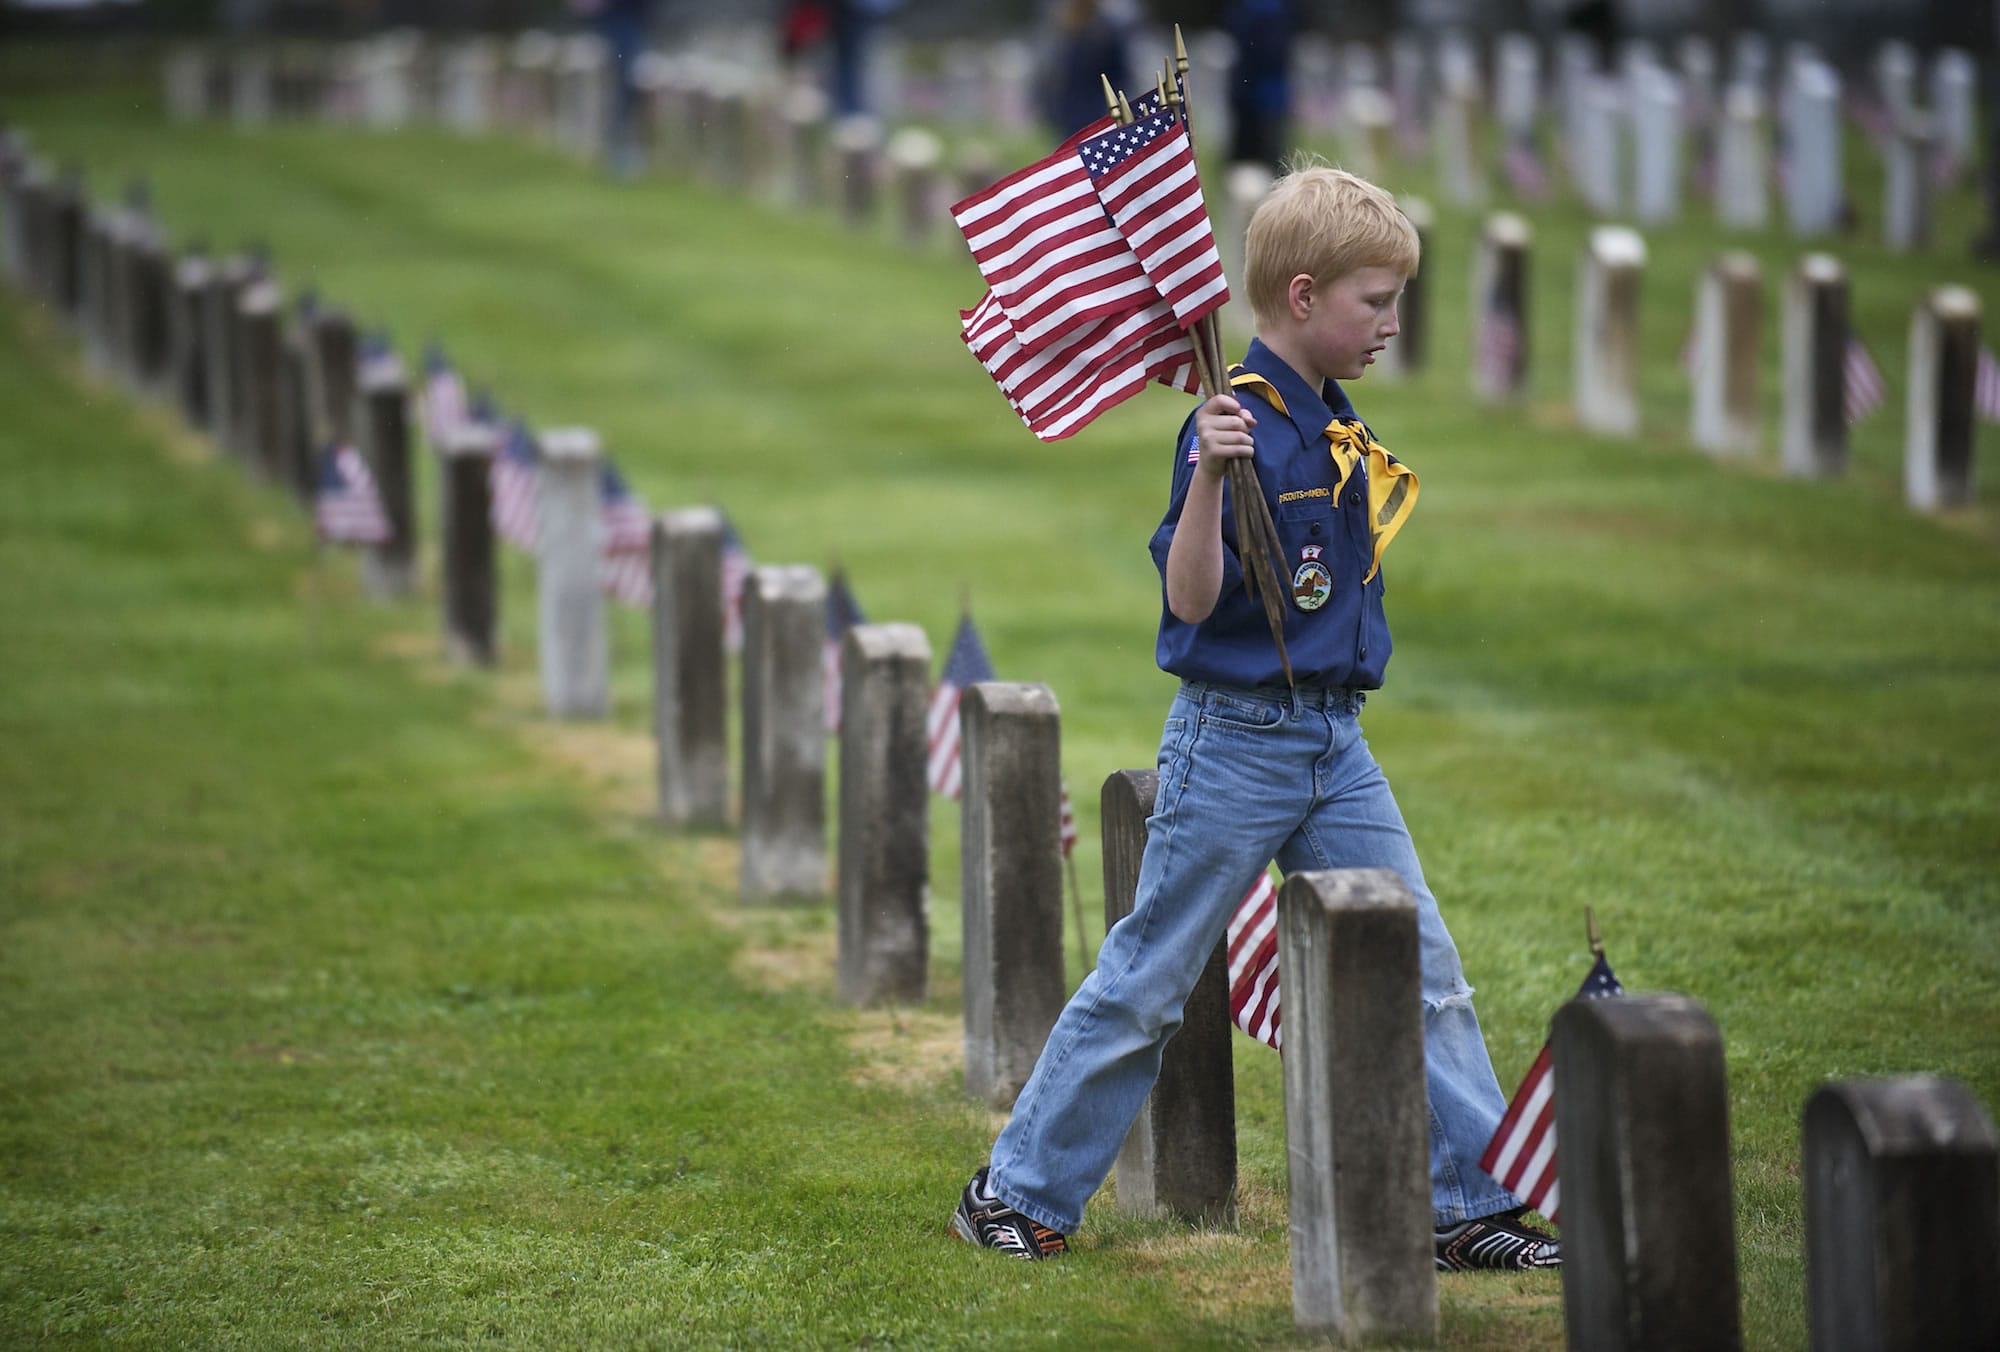 Ryan Nelson, 8, of Ridgefield, and other Cub Scouts from Pack 637 placed flags on the graves of veterans Thursday at the Post Cemetery.